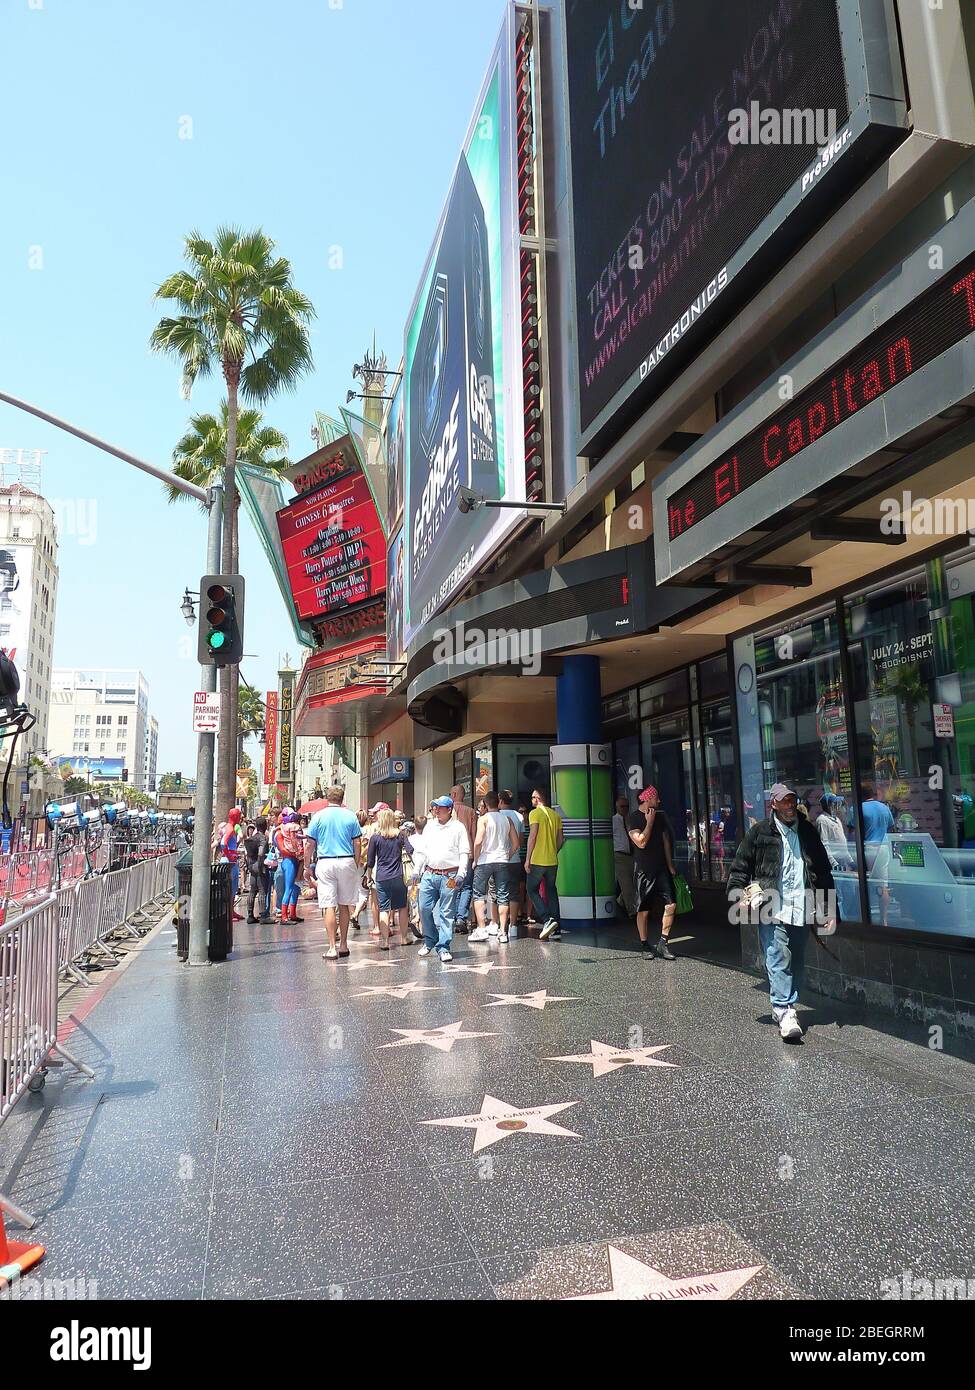 Los Angeles, AUG 11, 2009 - Morning view of the Hollywood Walk of Fame sidewalk area Stock Photo